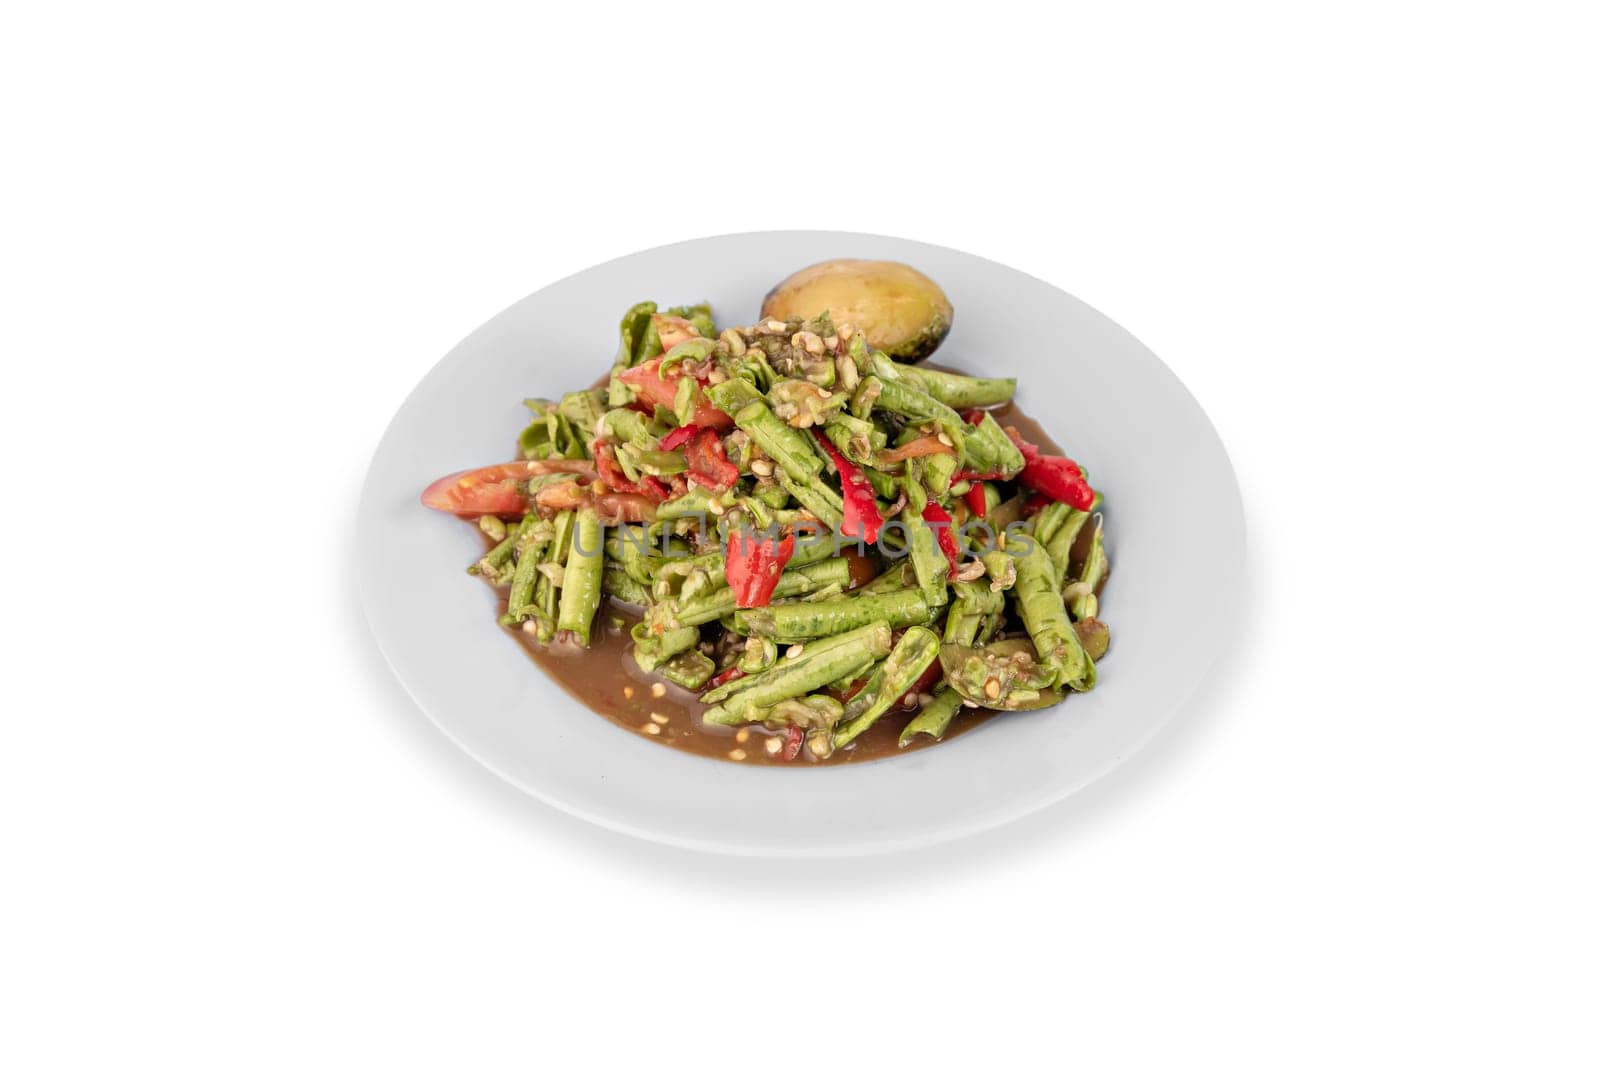 spicy cowpea salad on plate over white background , asian cuisine